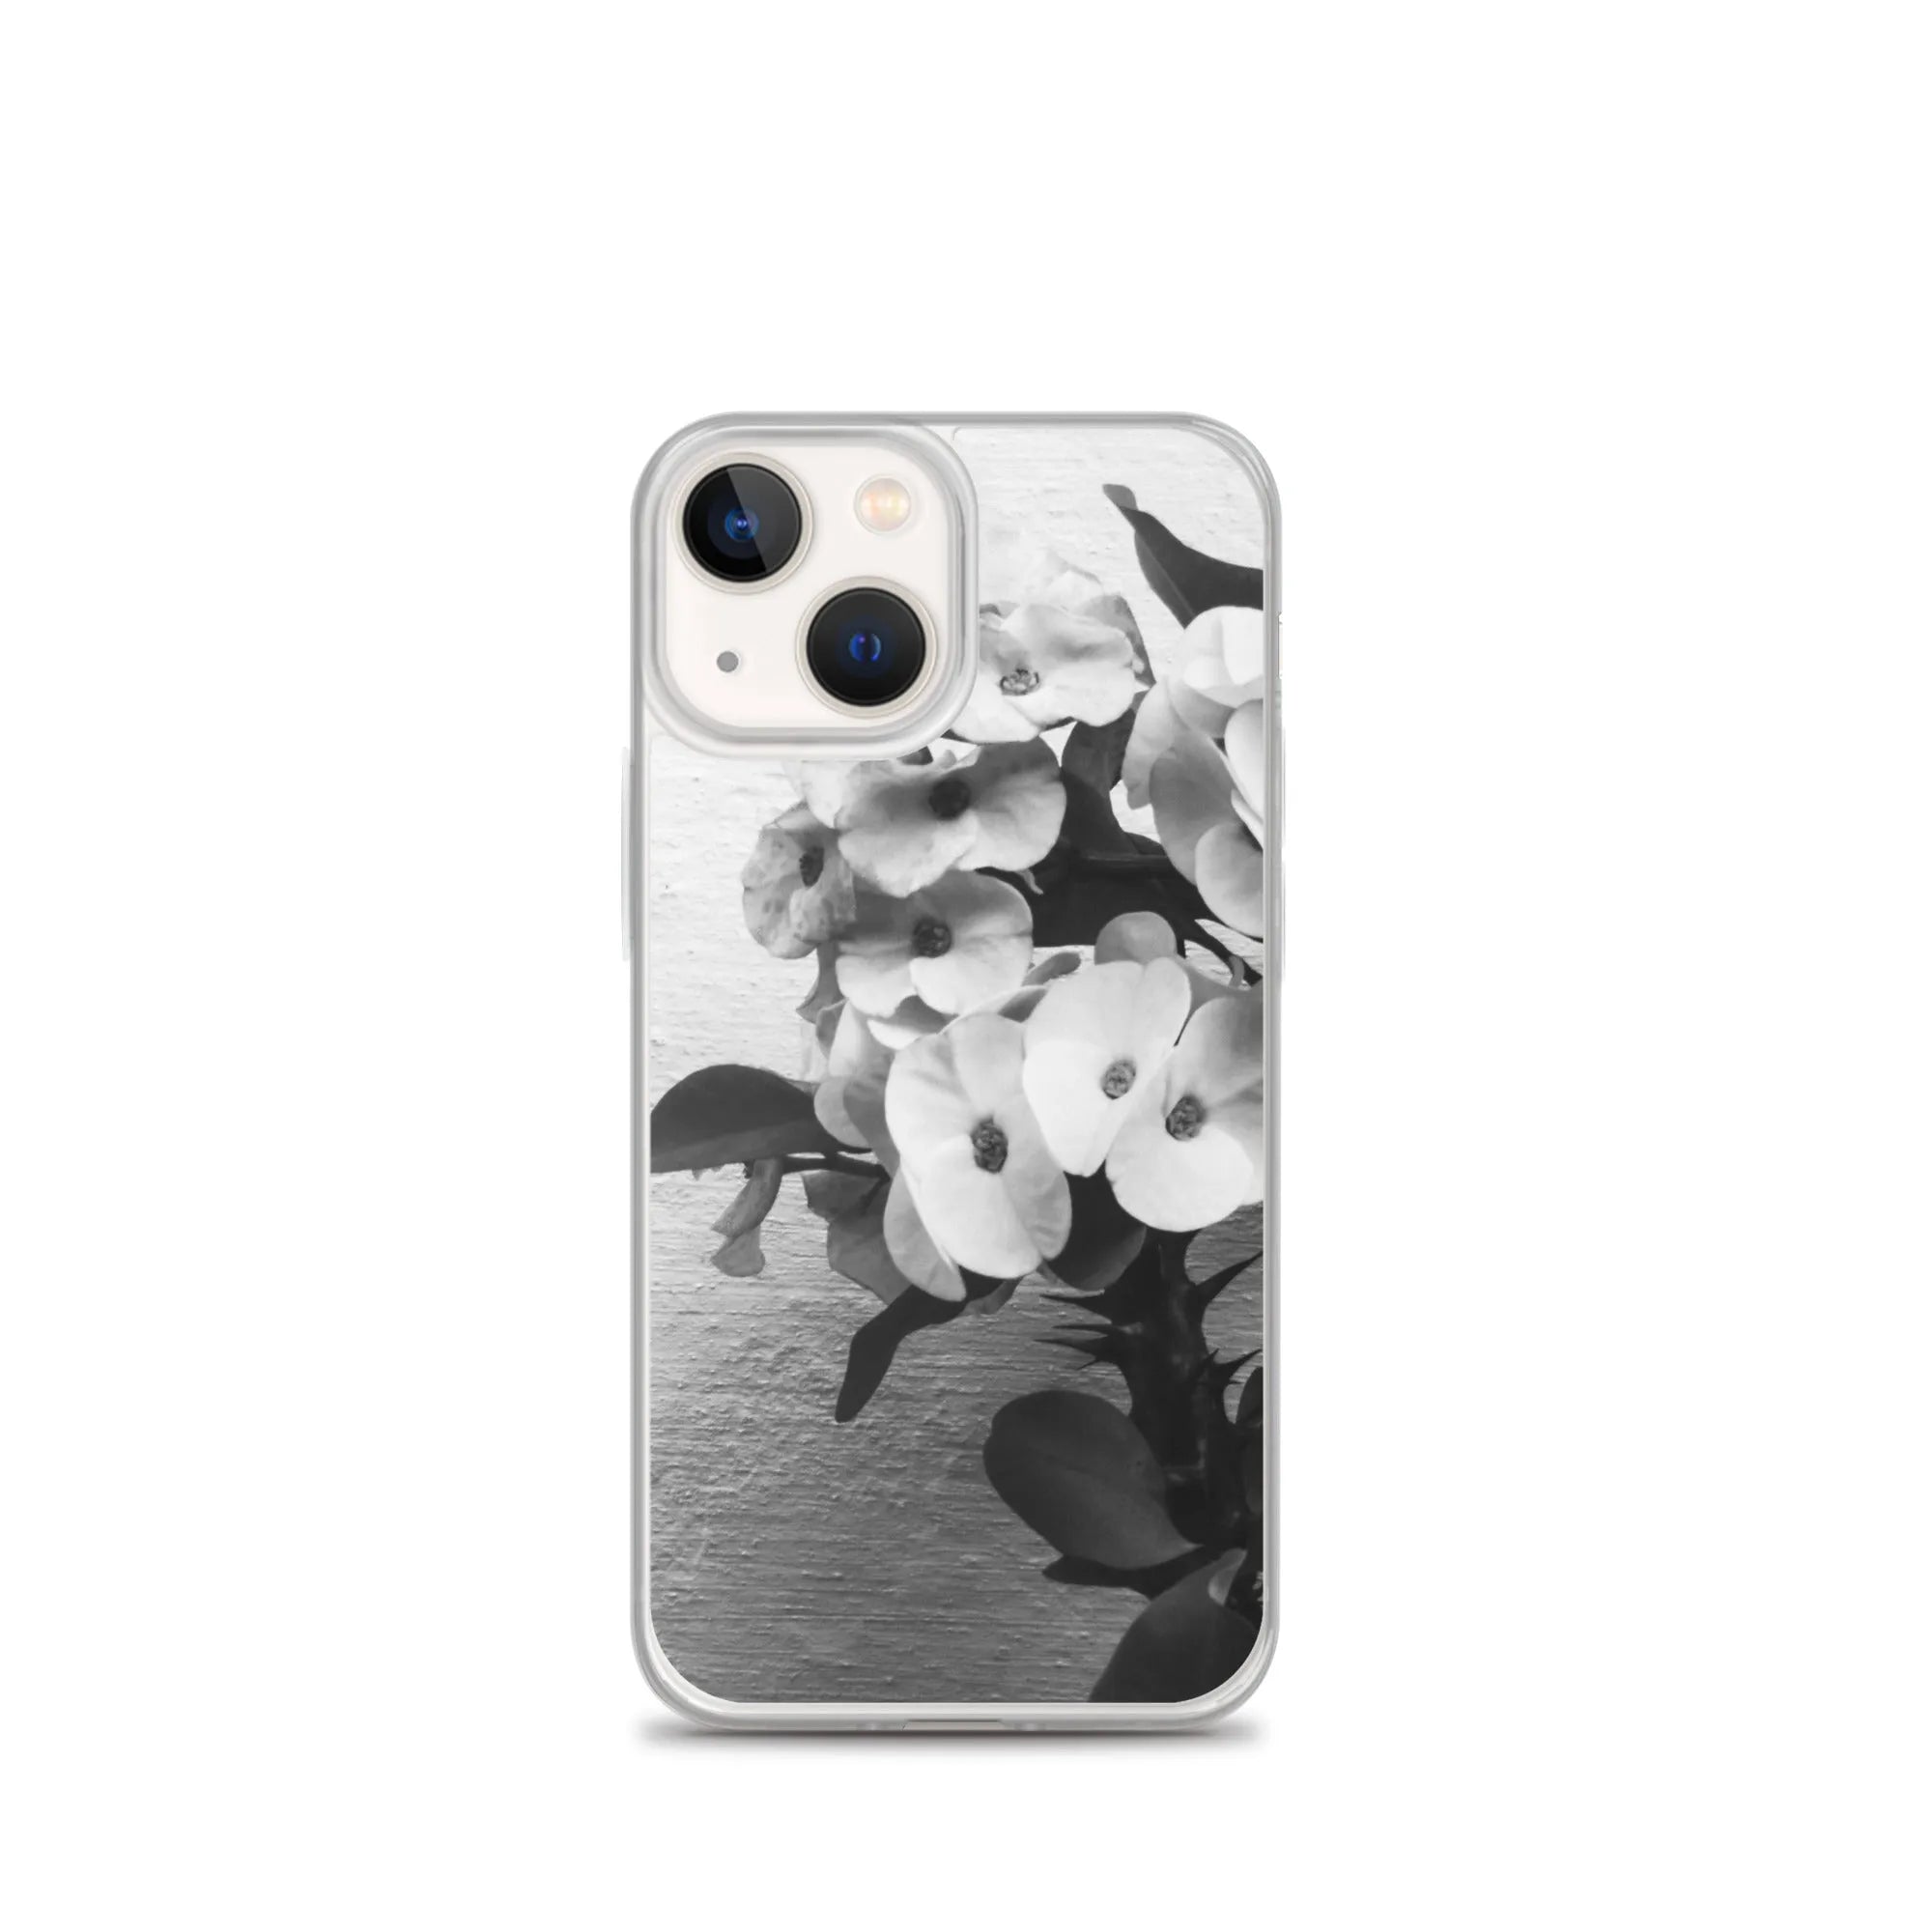 Wallflower Floral Iphone Case - Black And White - Iphone 13 Mini - Mobile Phone Cases - Aesthetic Art